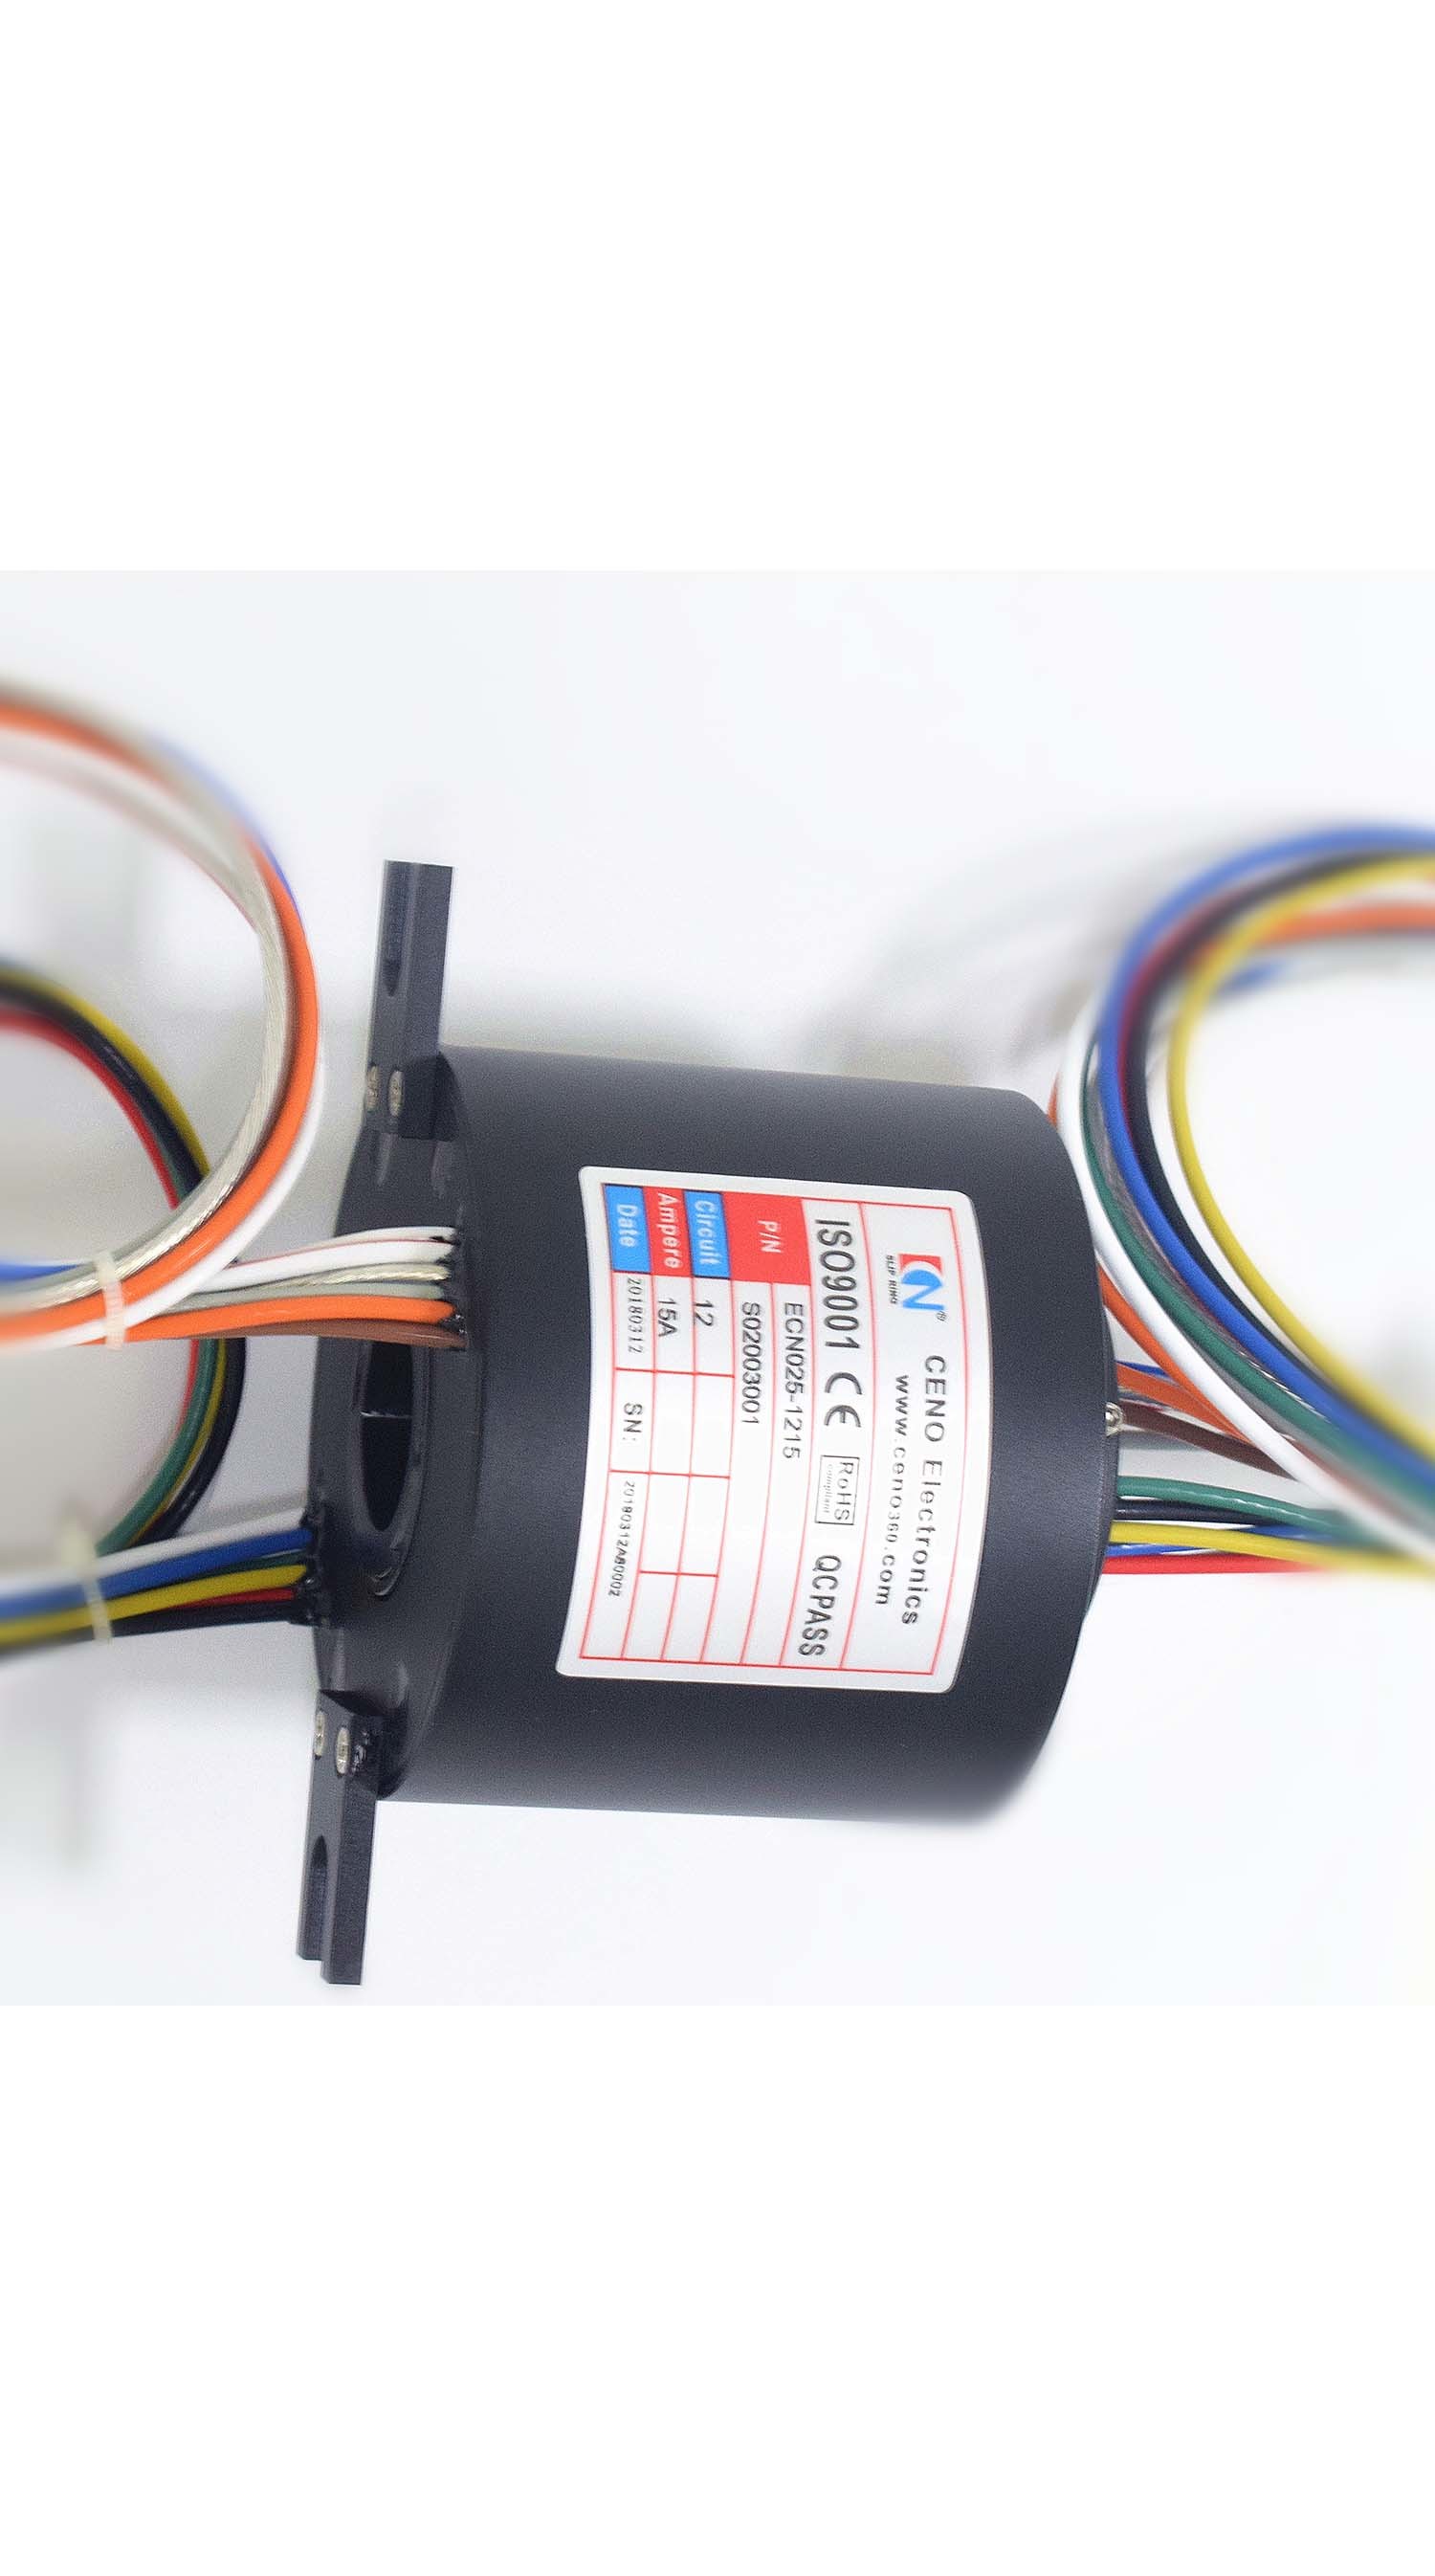 Profi Bus Rotating Electrical Connector Slip Ring And Current Could Be